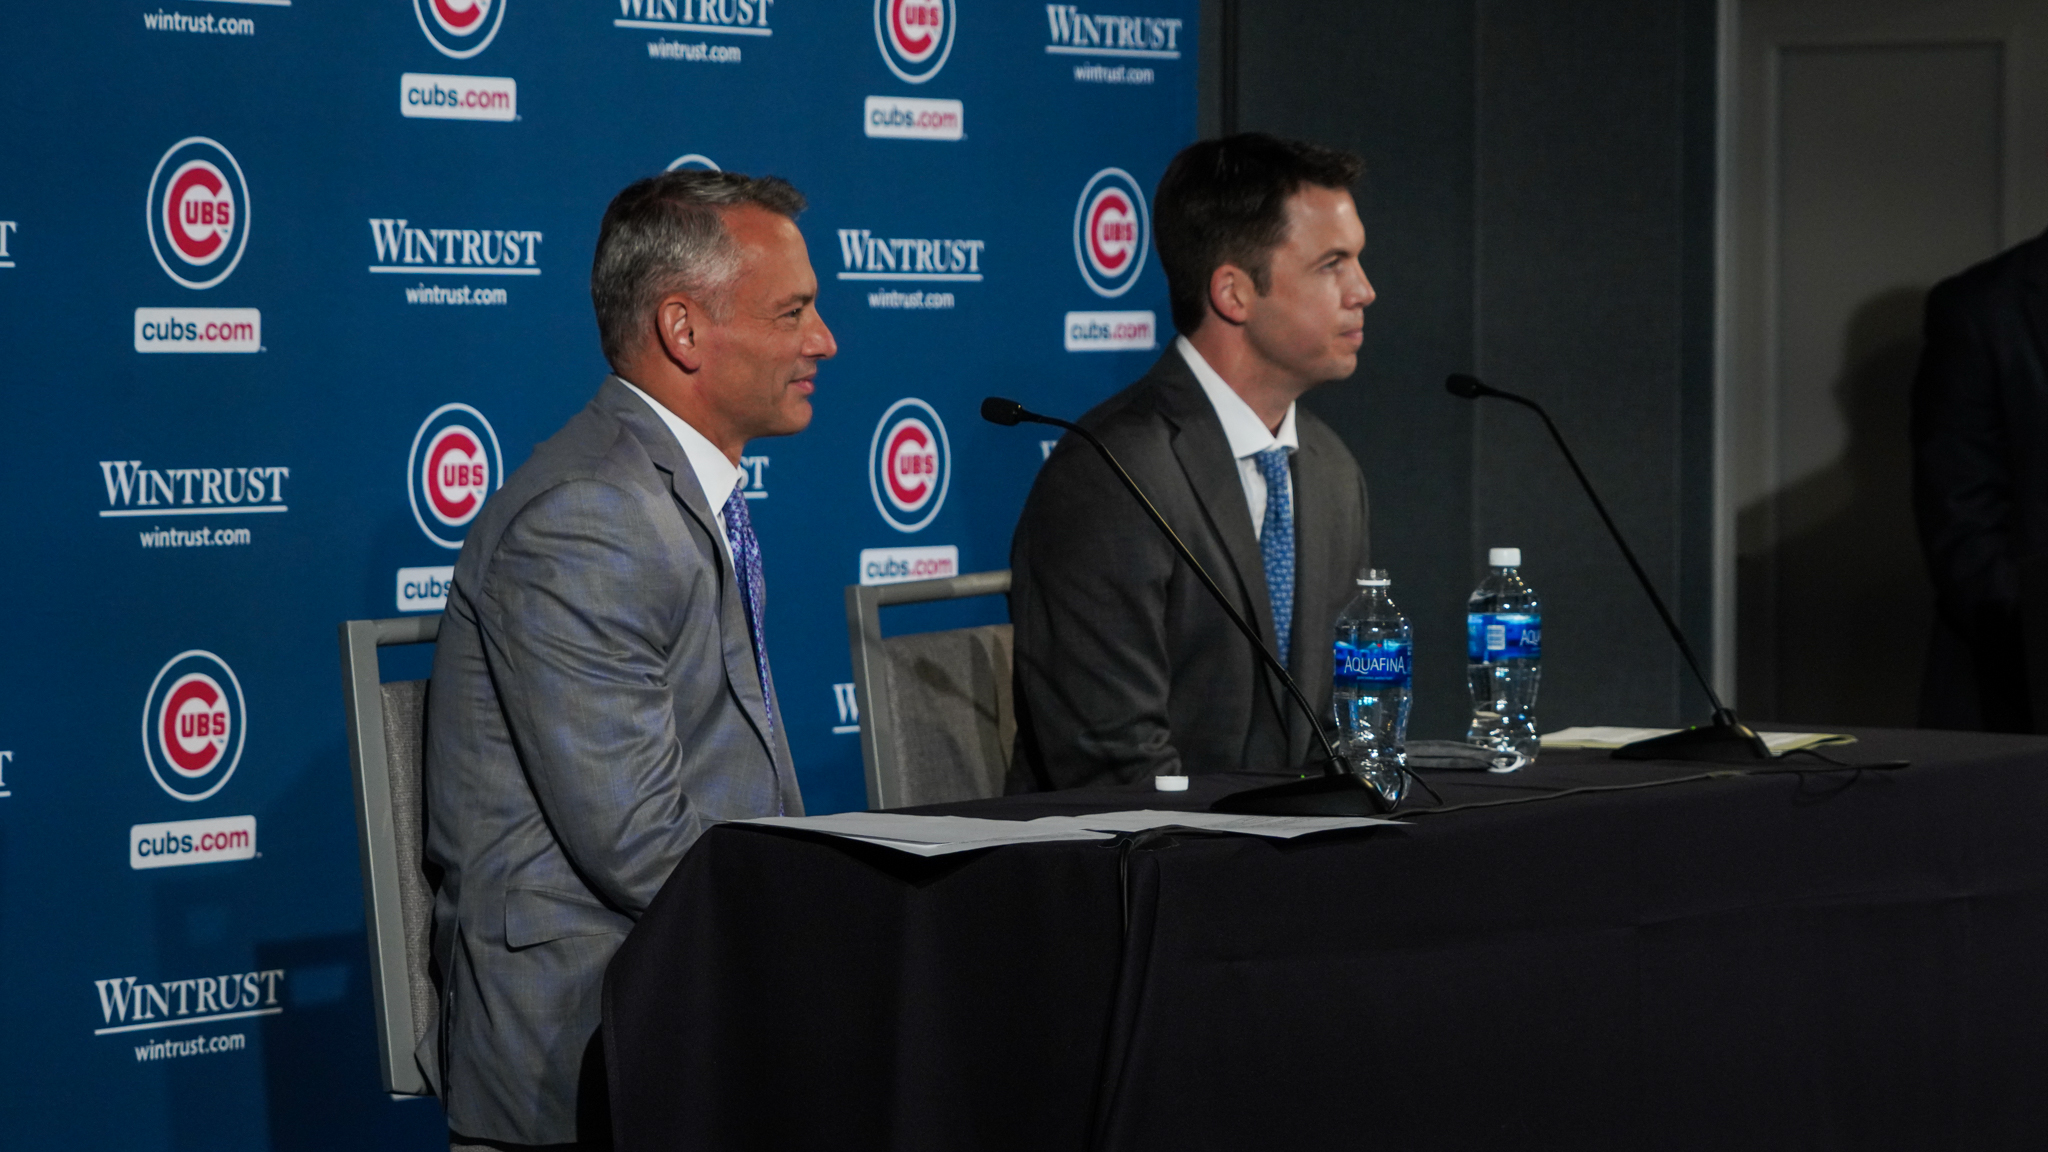 Now that the front office is set, the Cubs can fully focus on again being a contender. 